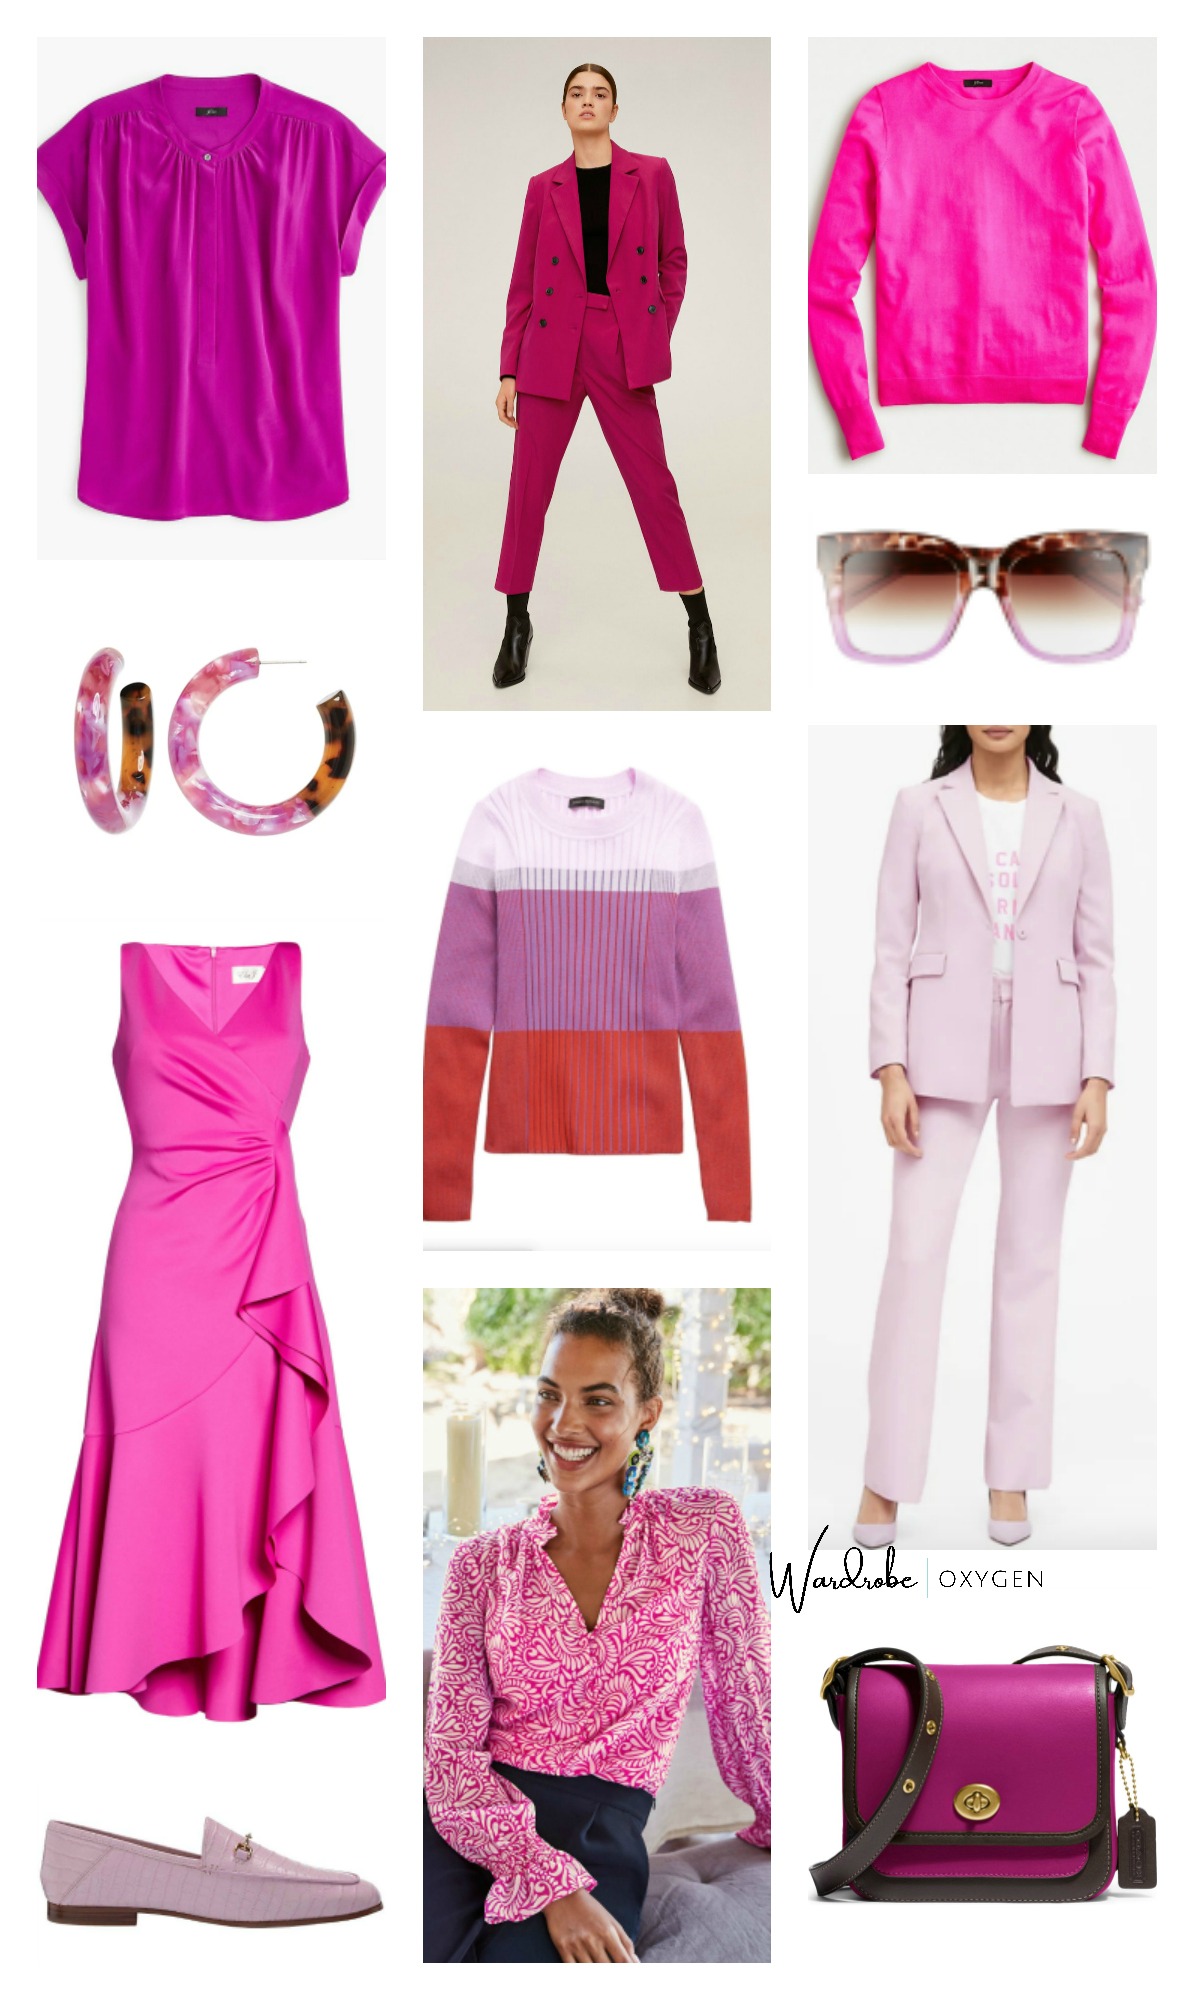 Spring Forward in Pink, Fuchsia, Lilac, and Purple